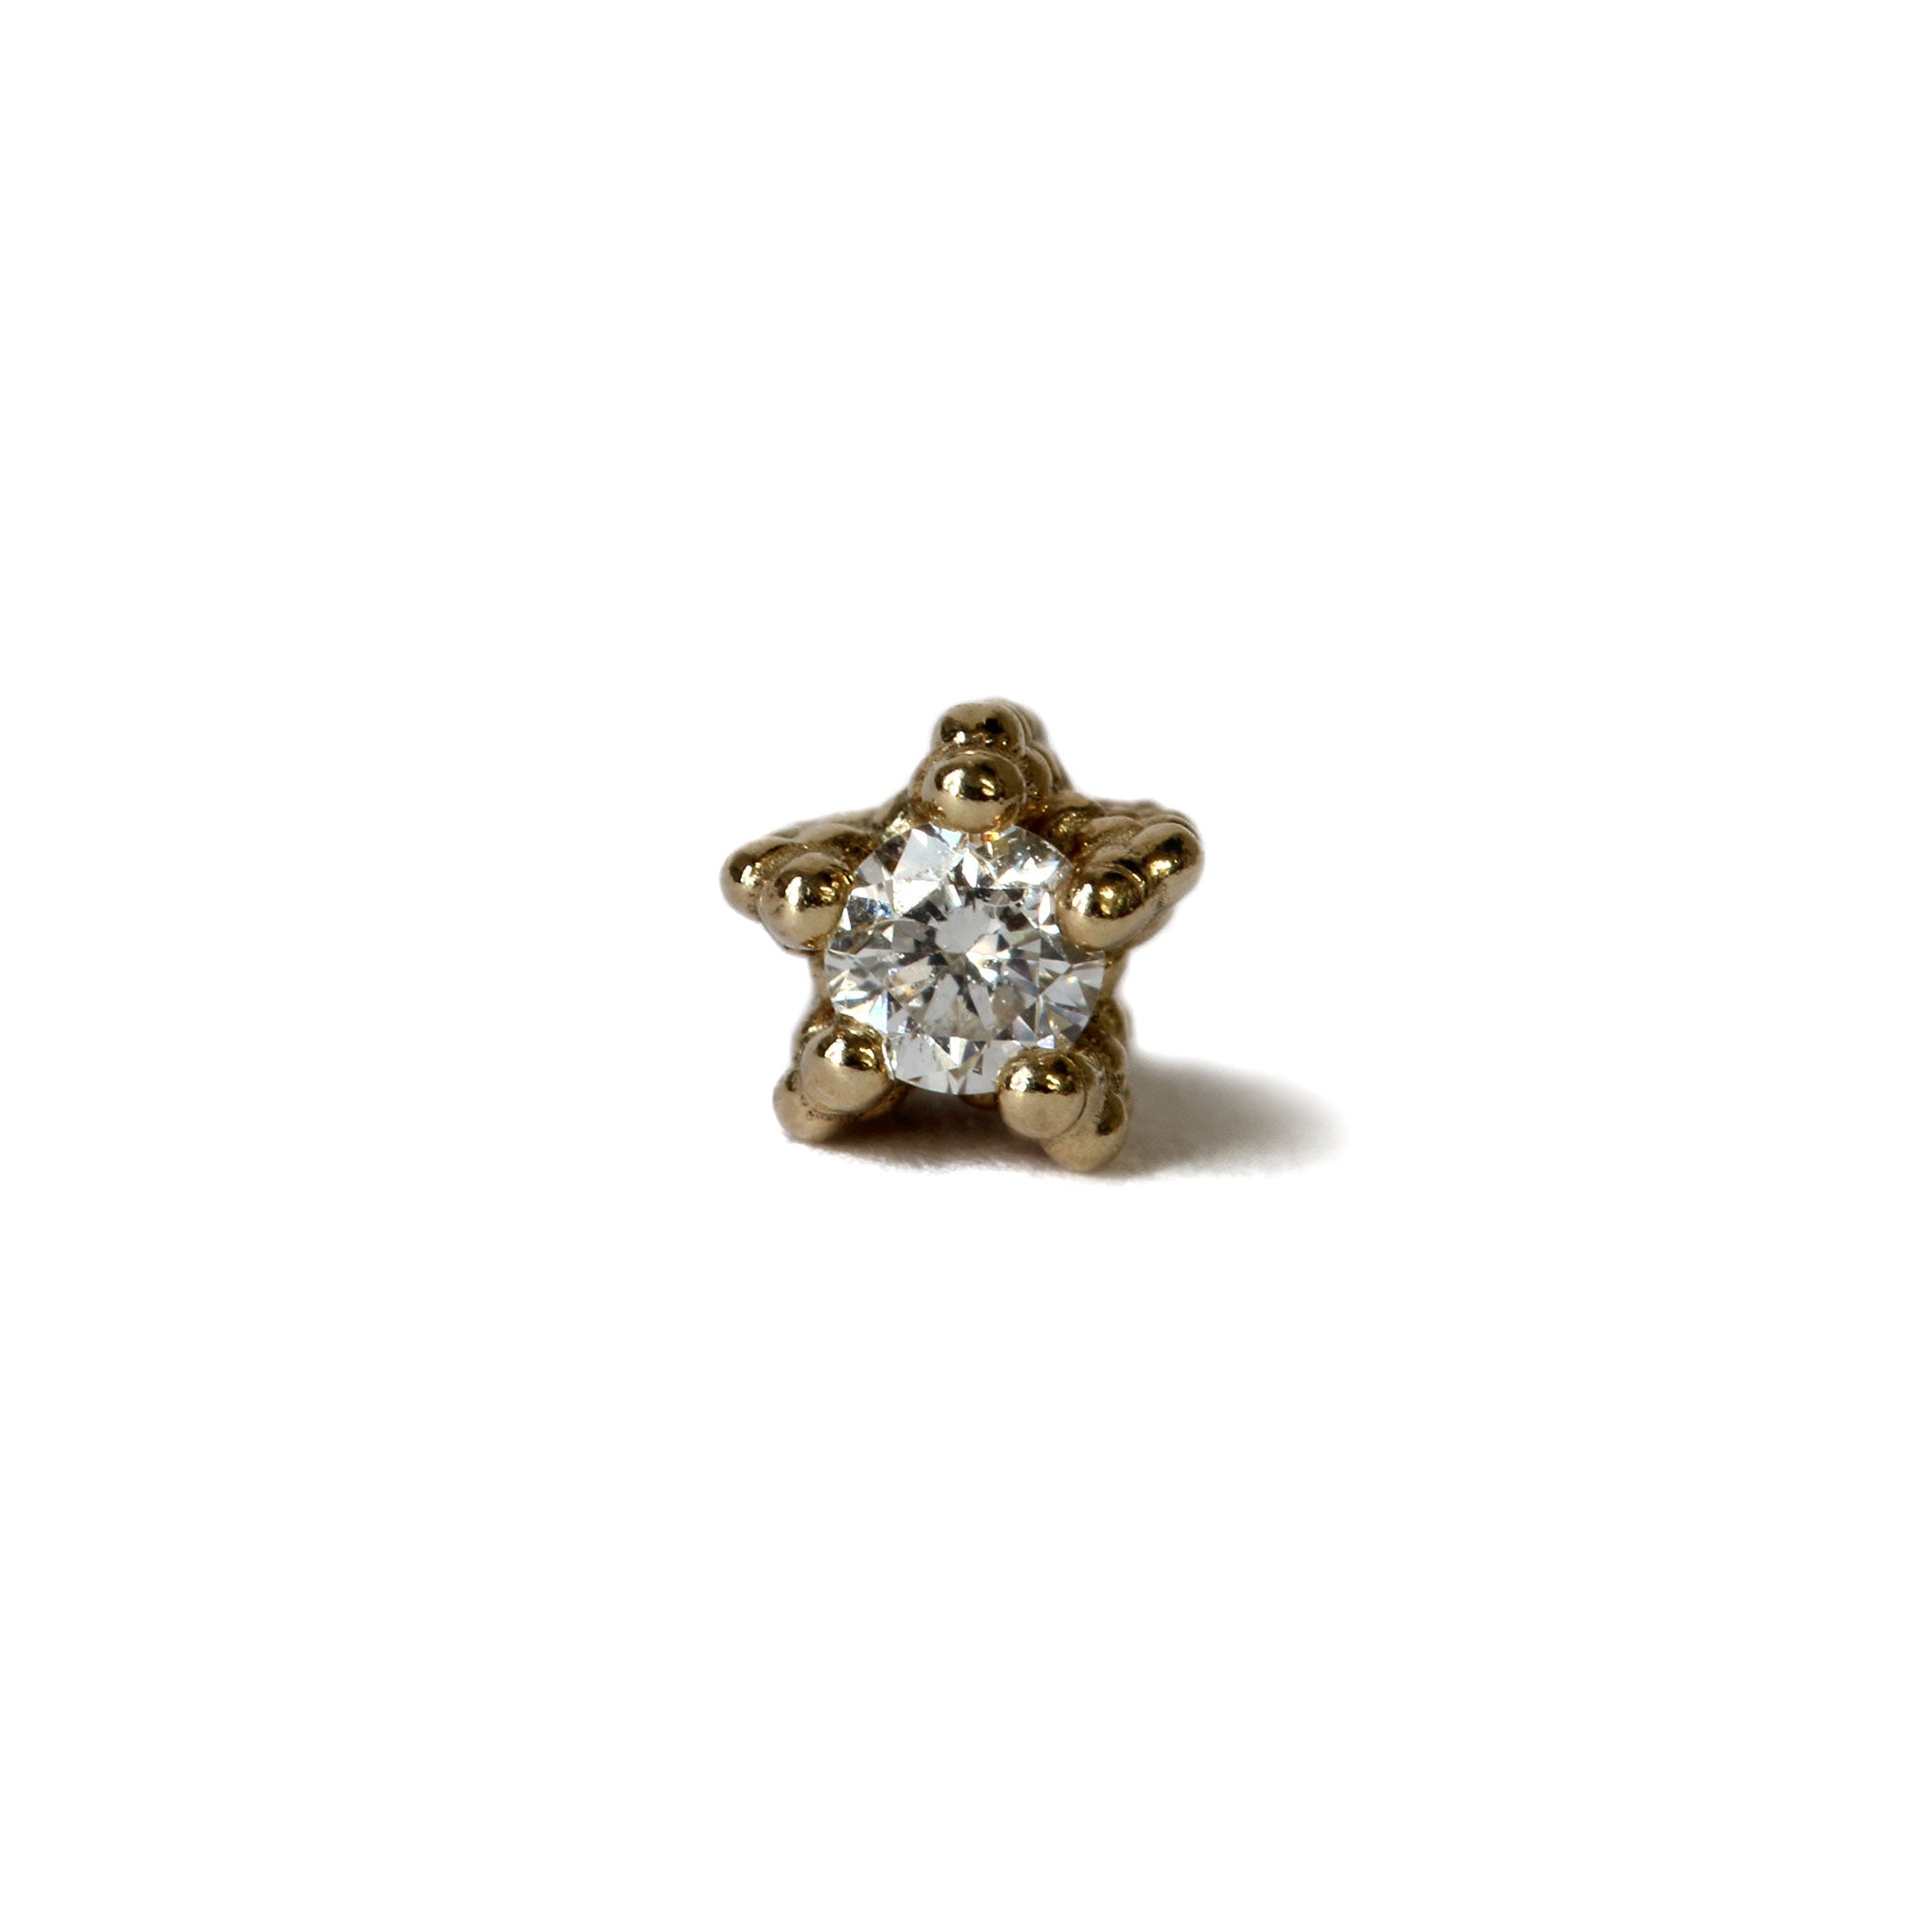 Brilliant cut diamond set in textured gold setting on white background